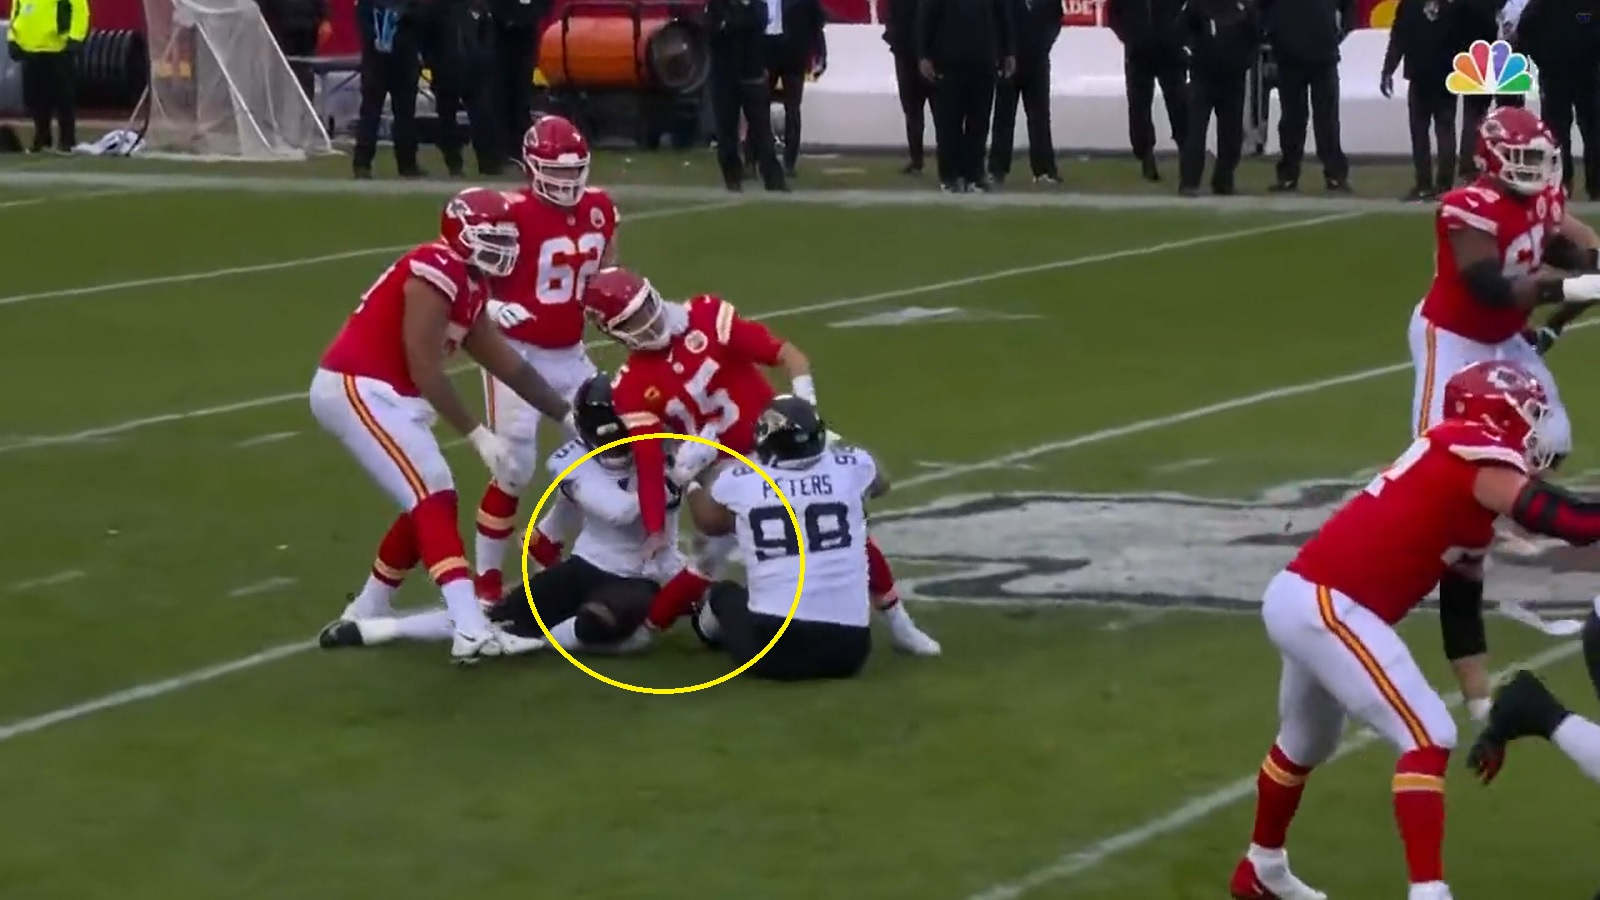 Patrick Mahomes led the Kansas City Chiefs to the Super Bowl with one foot